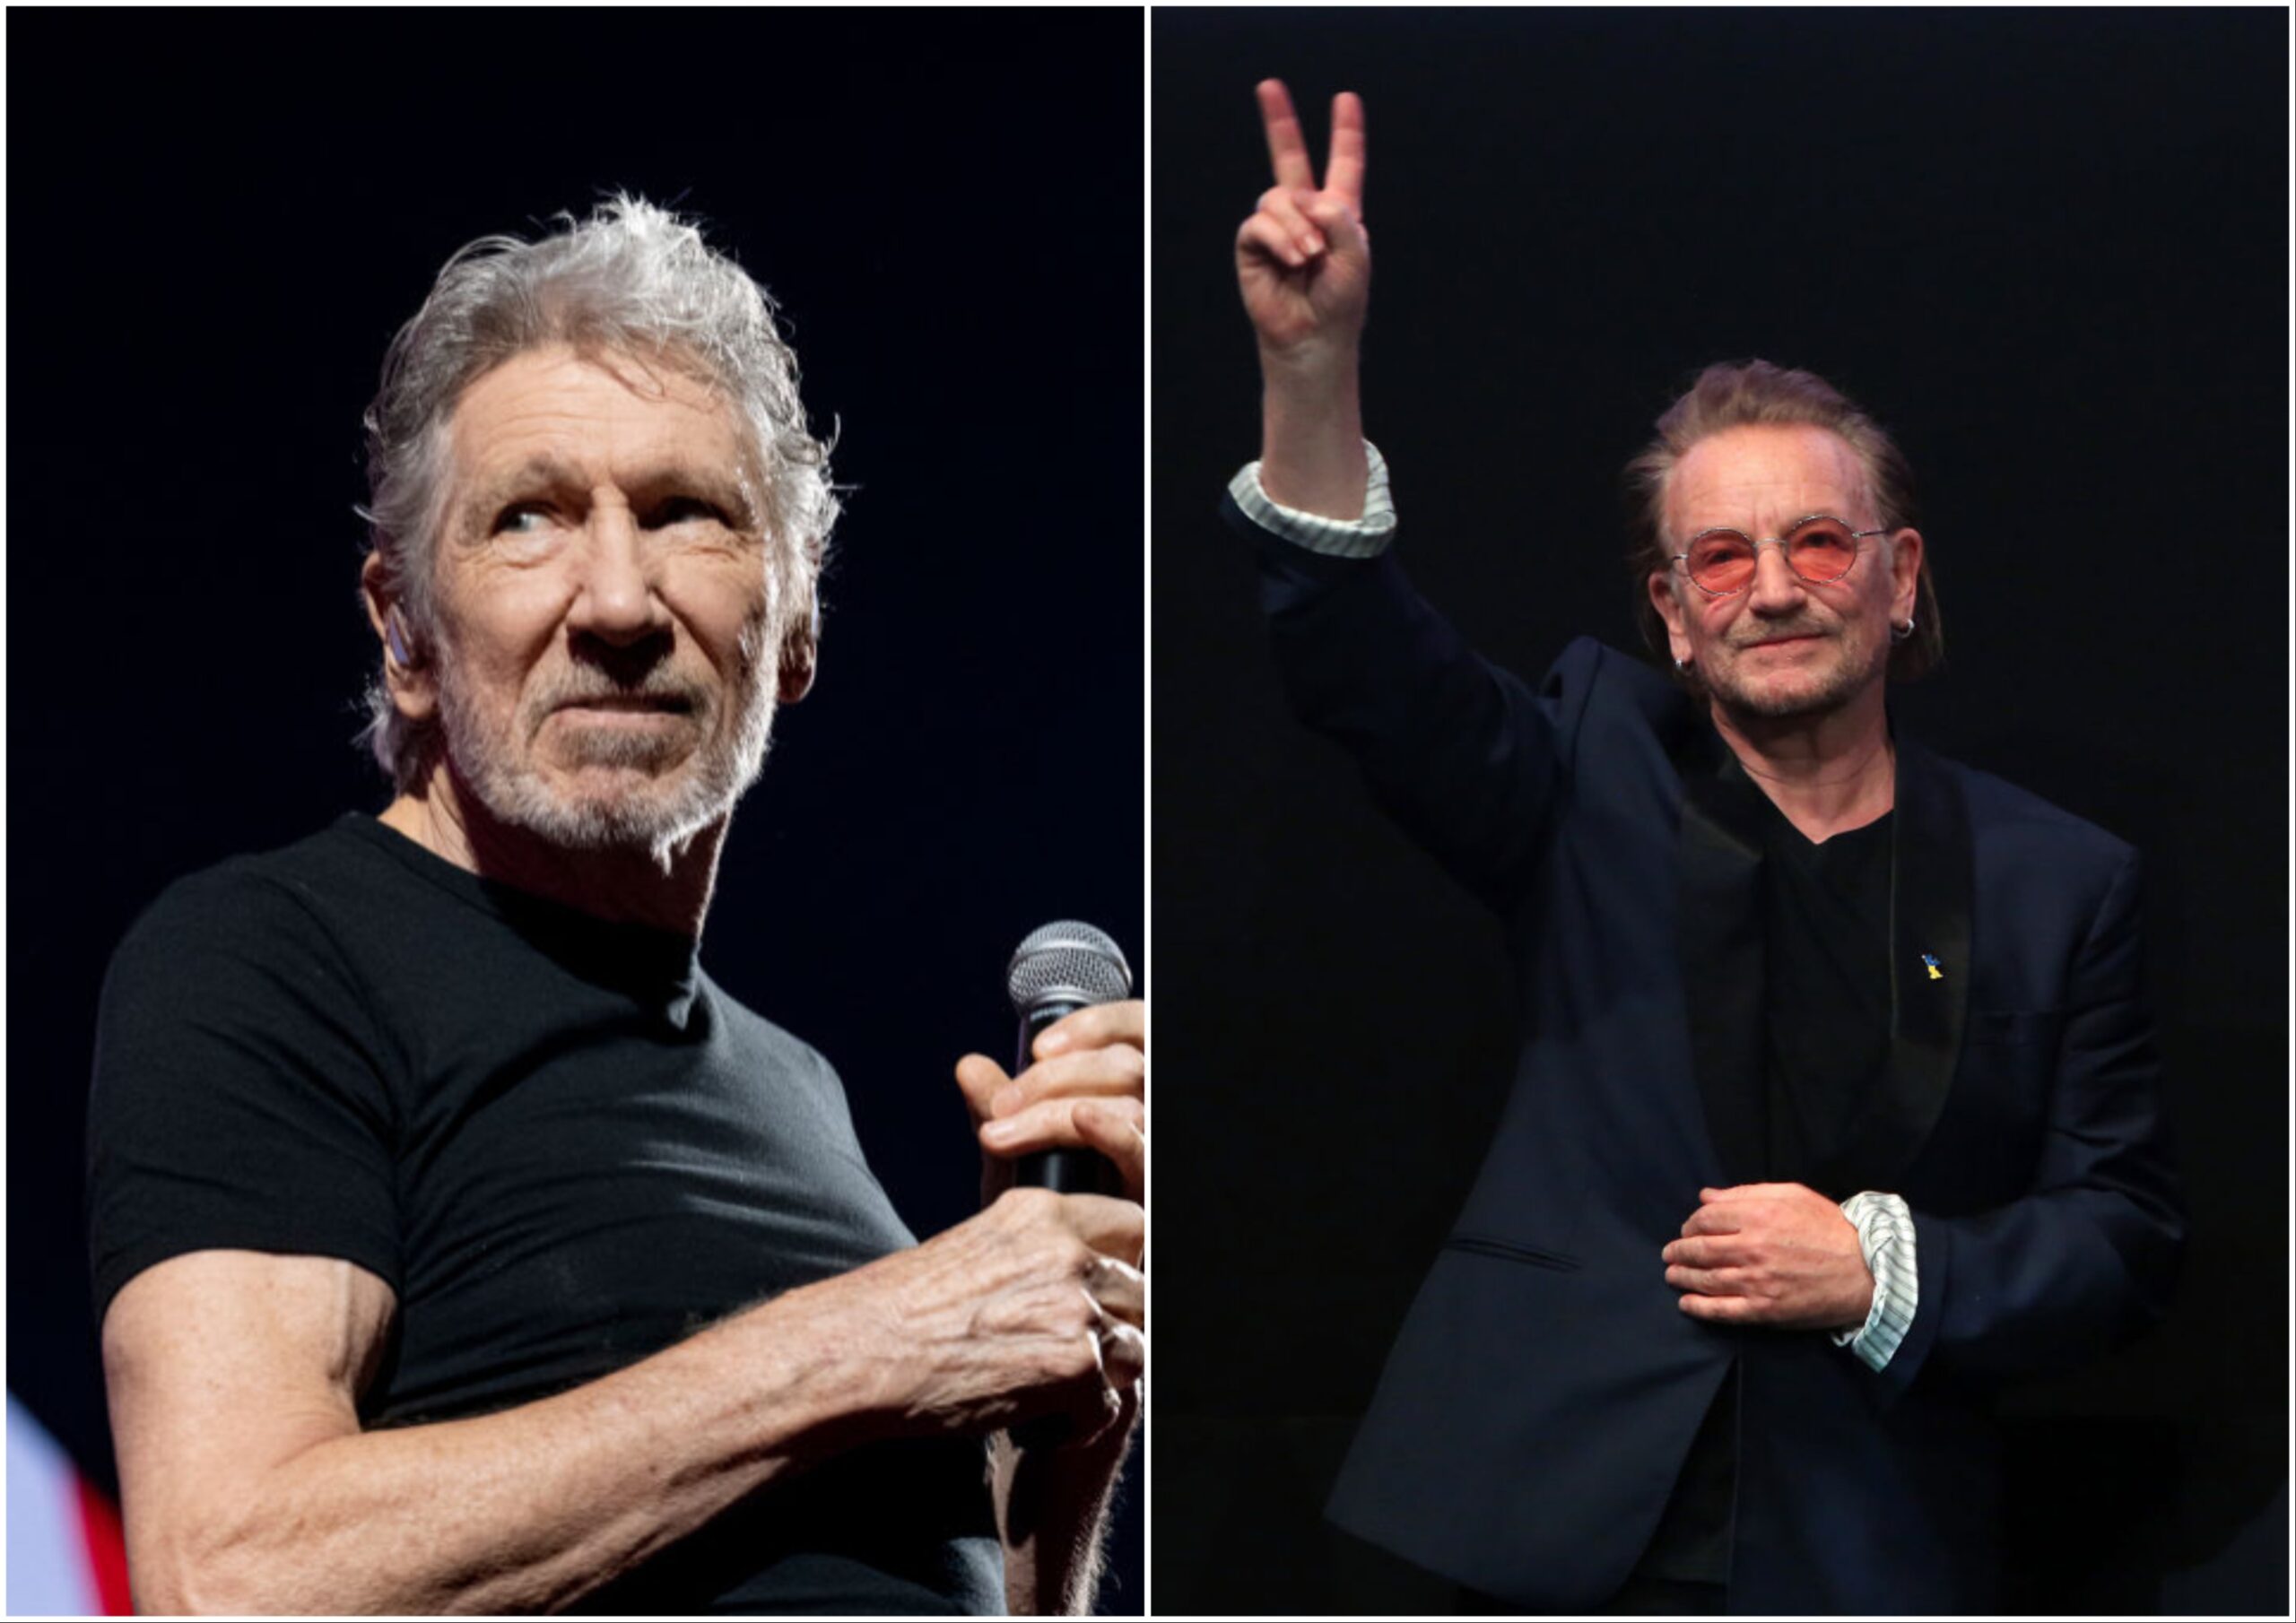 Roger Waters criticizes Bono for honoring Oct. 7 massacre victims